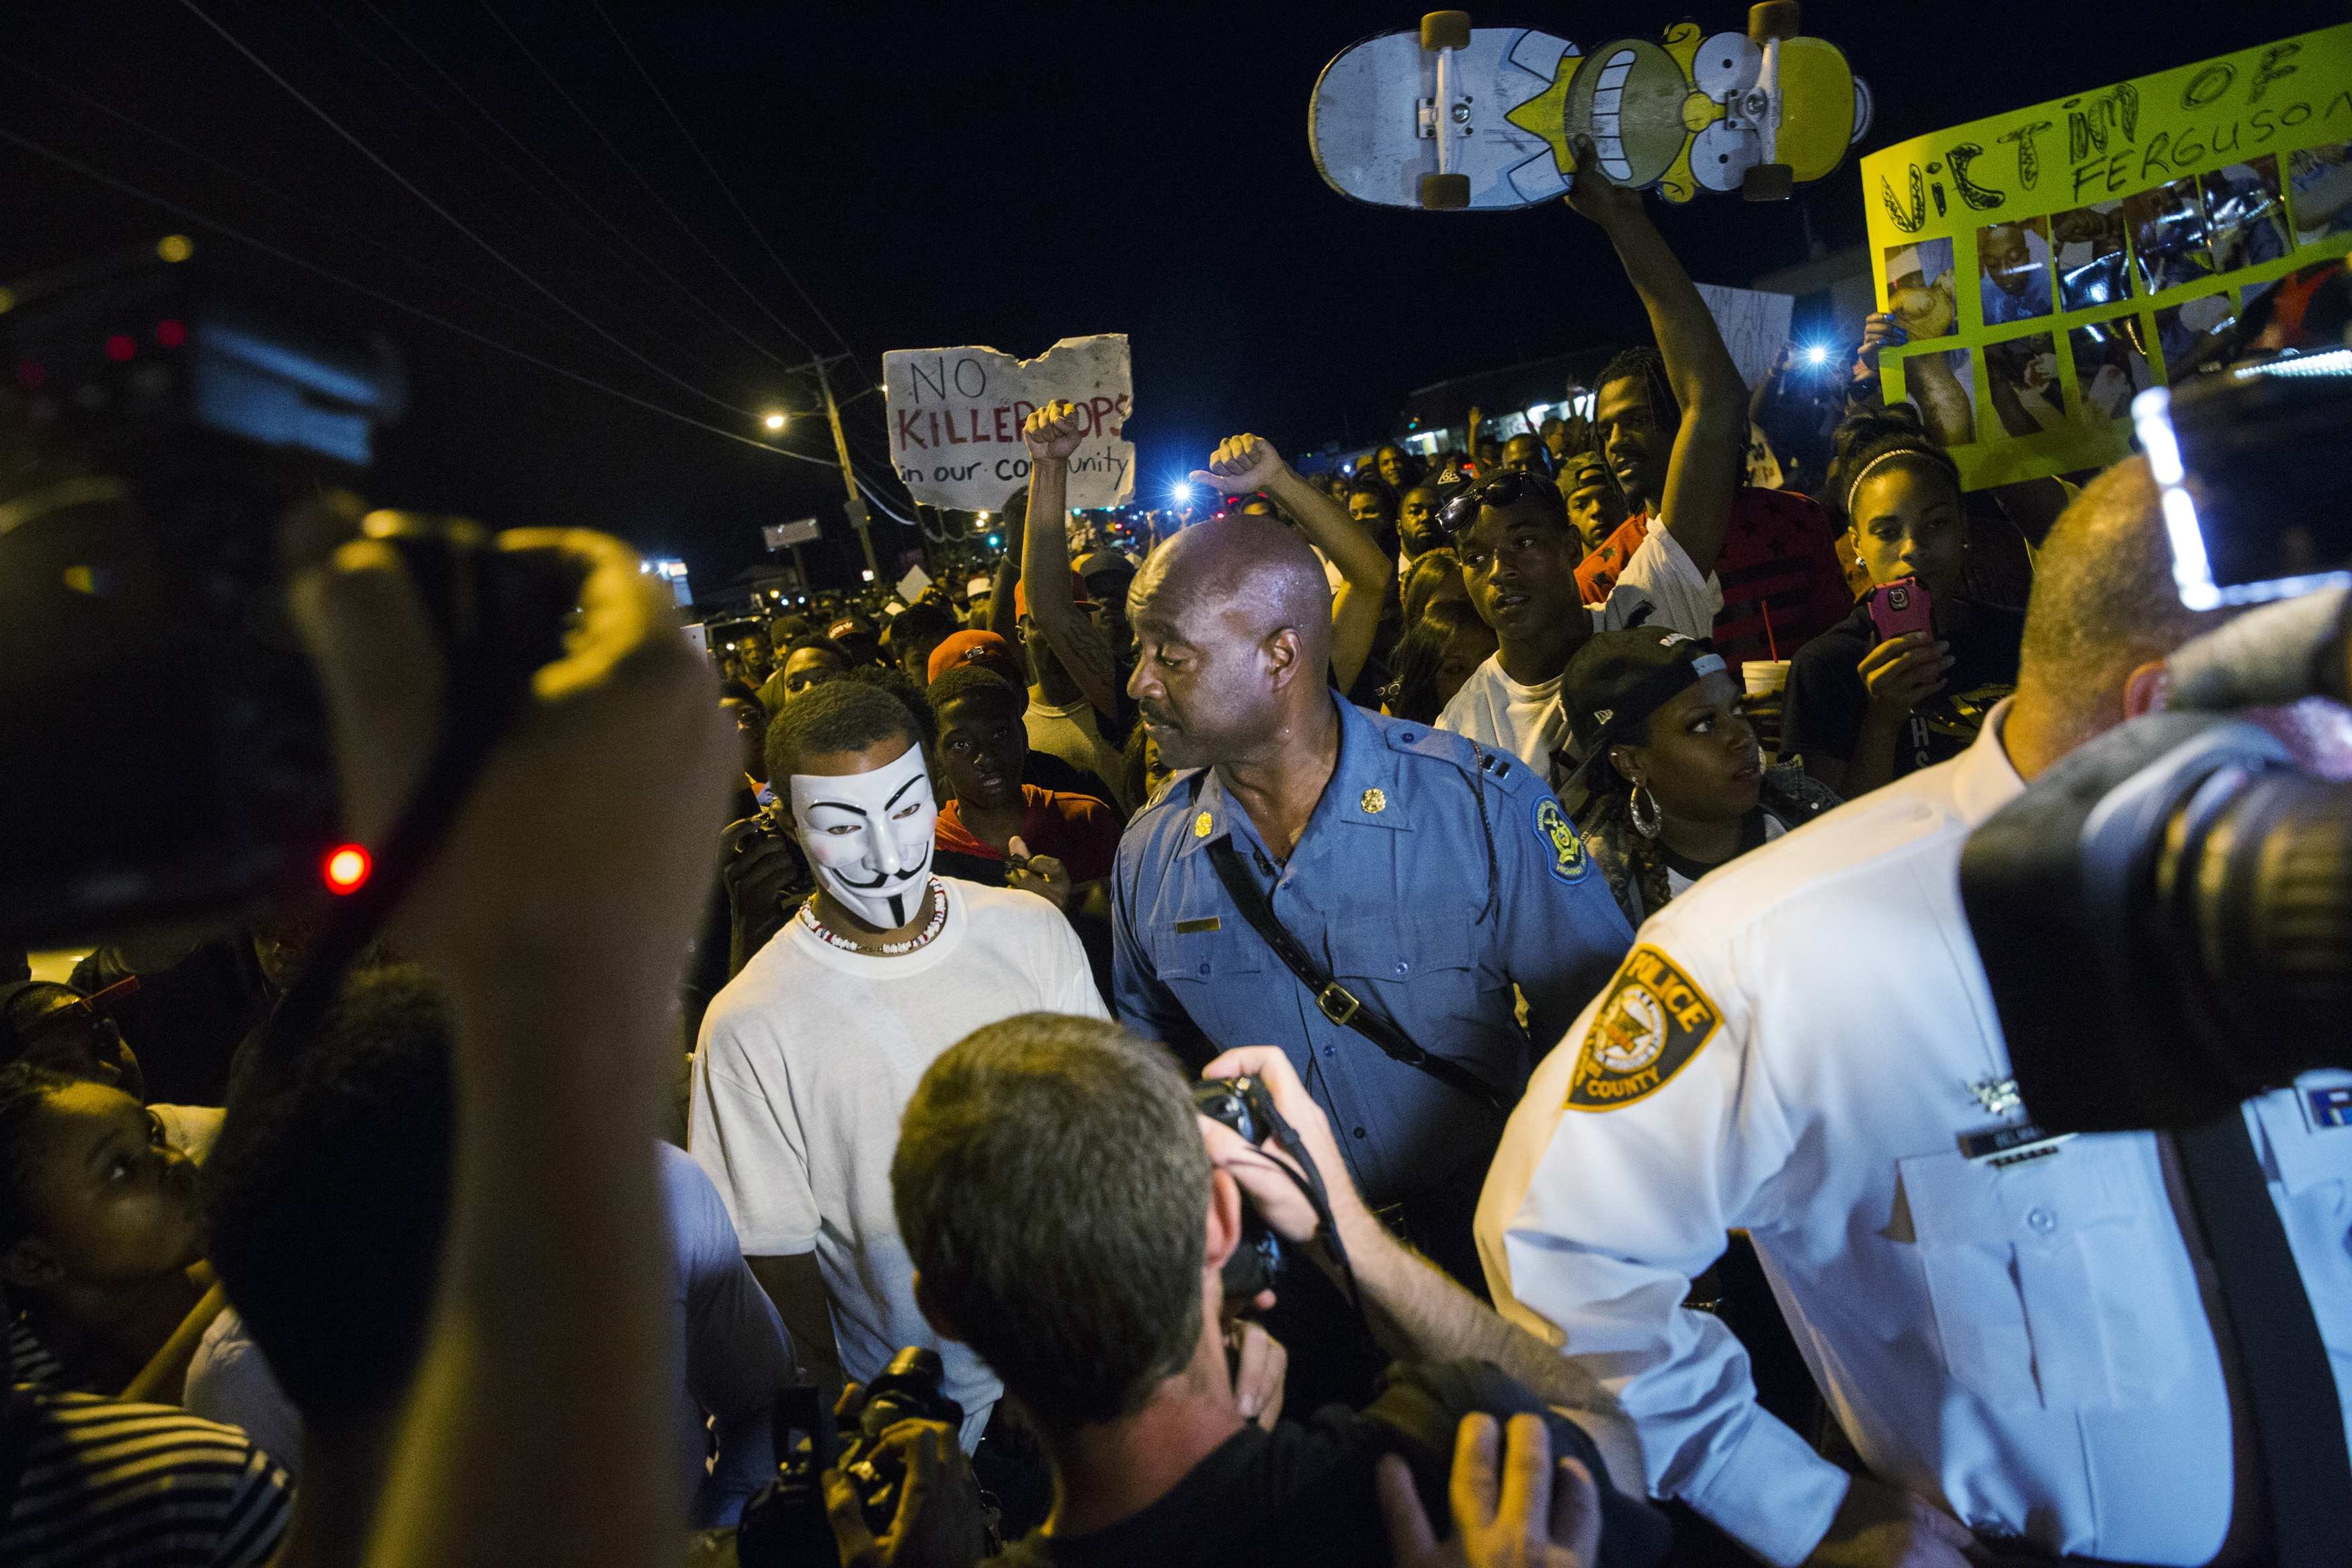 Ron Johnson of Missouri State Highway Patrol speaks to a protester wearing a Guy Fawkes mask while he walks through a peaceful demonstration in Ferguson, Mo., on Aug. 14, 2014 (Lucas Jackson—Reuters)